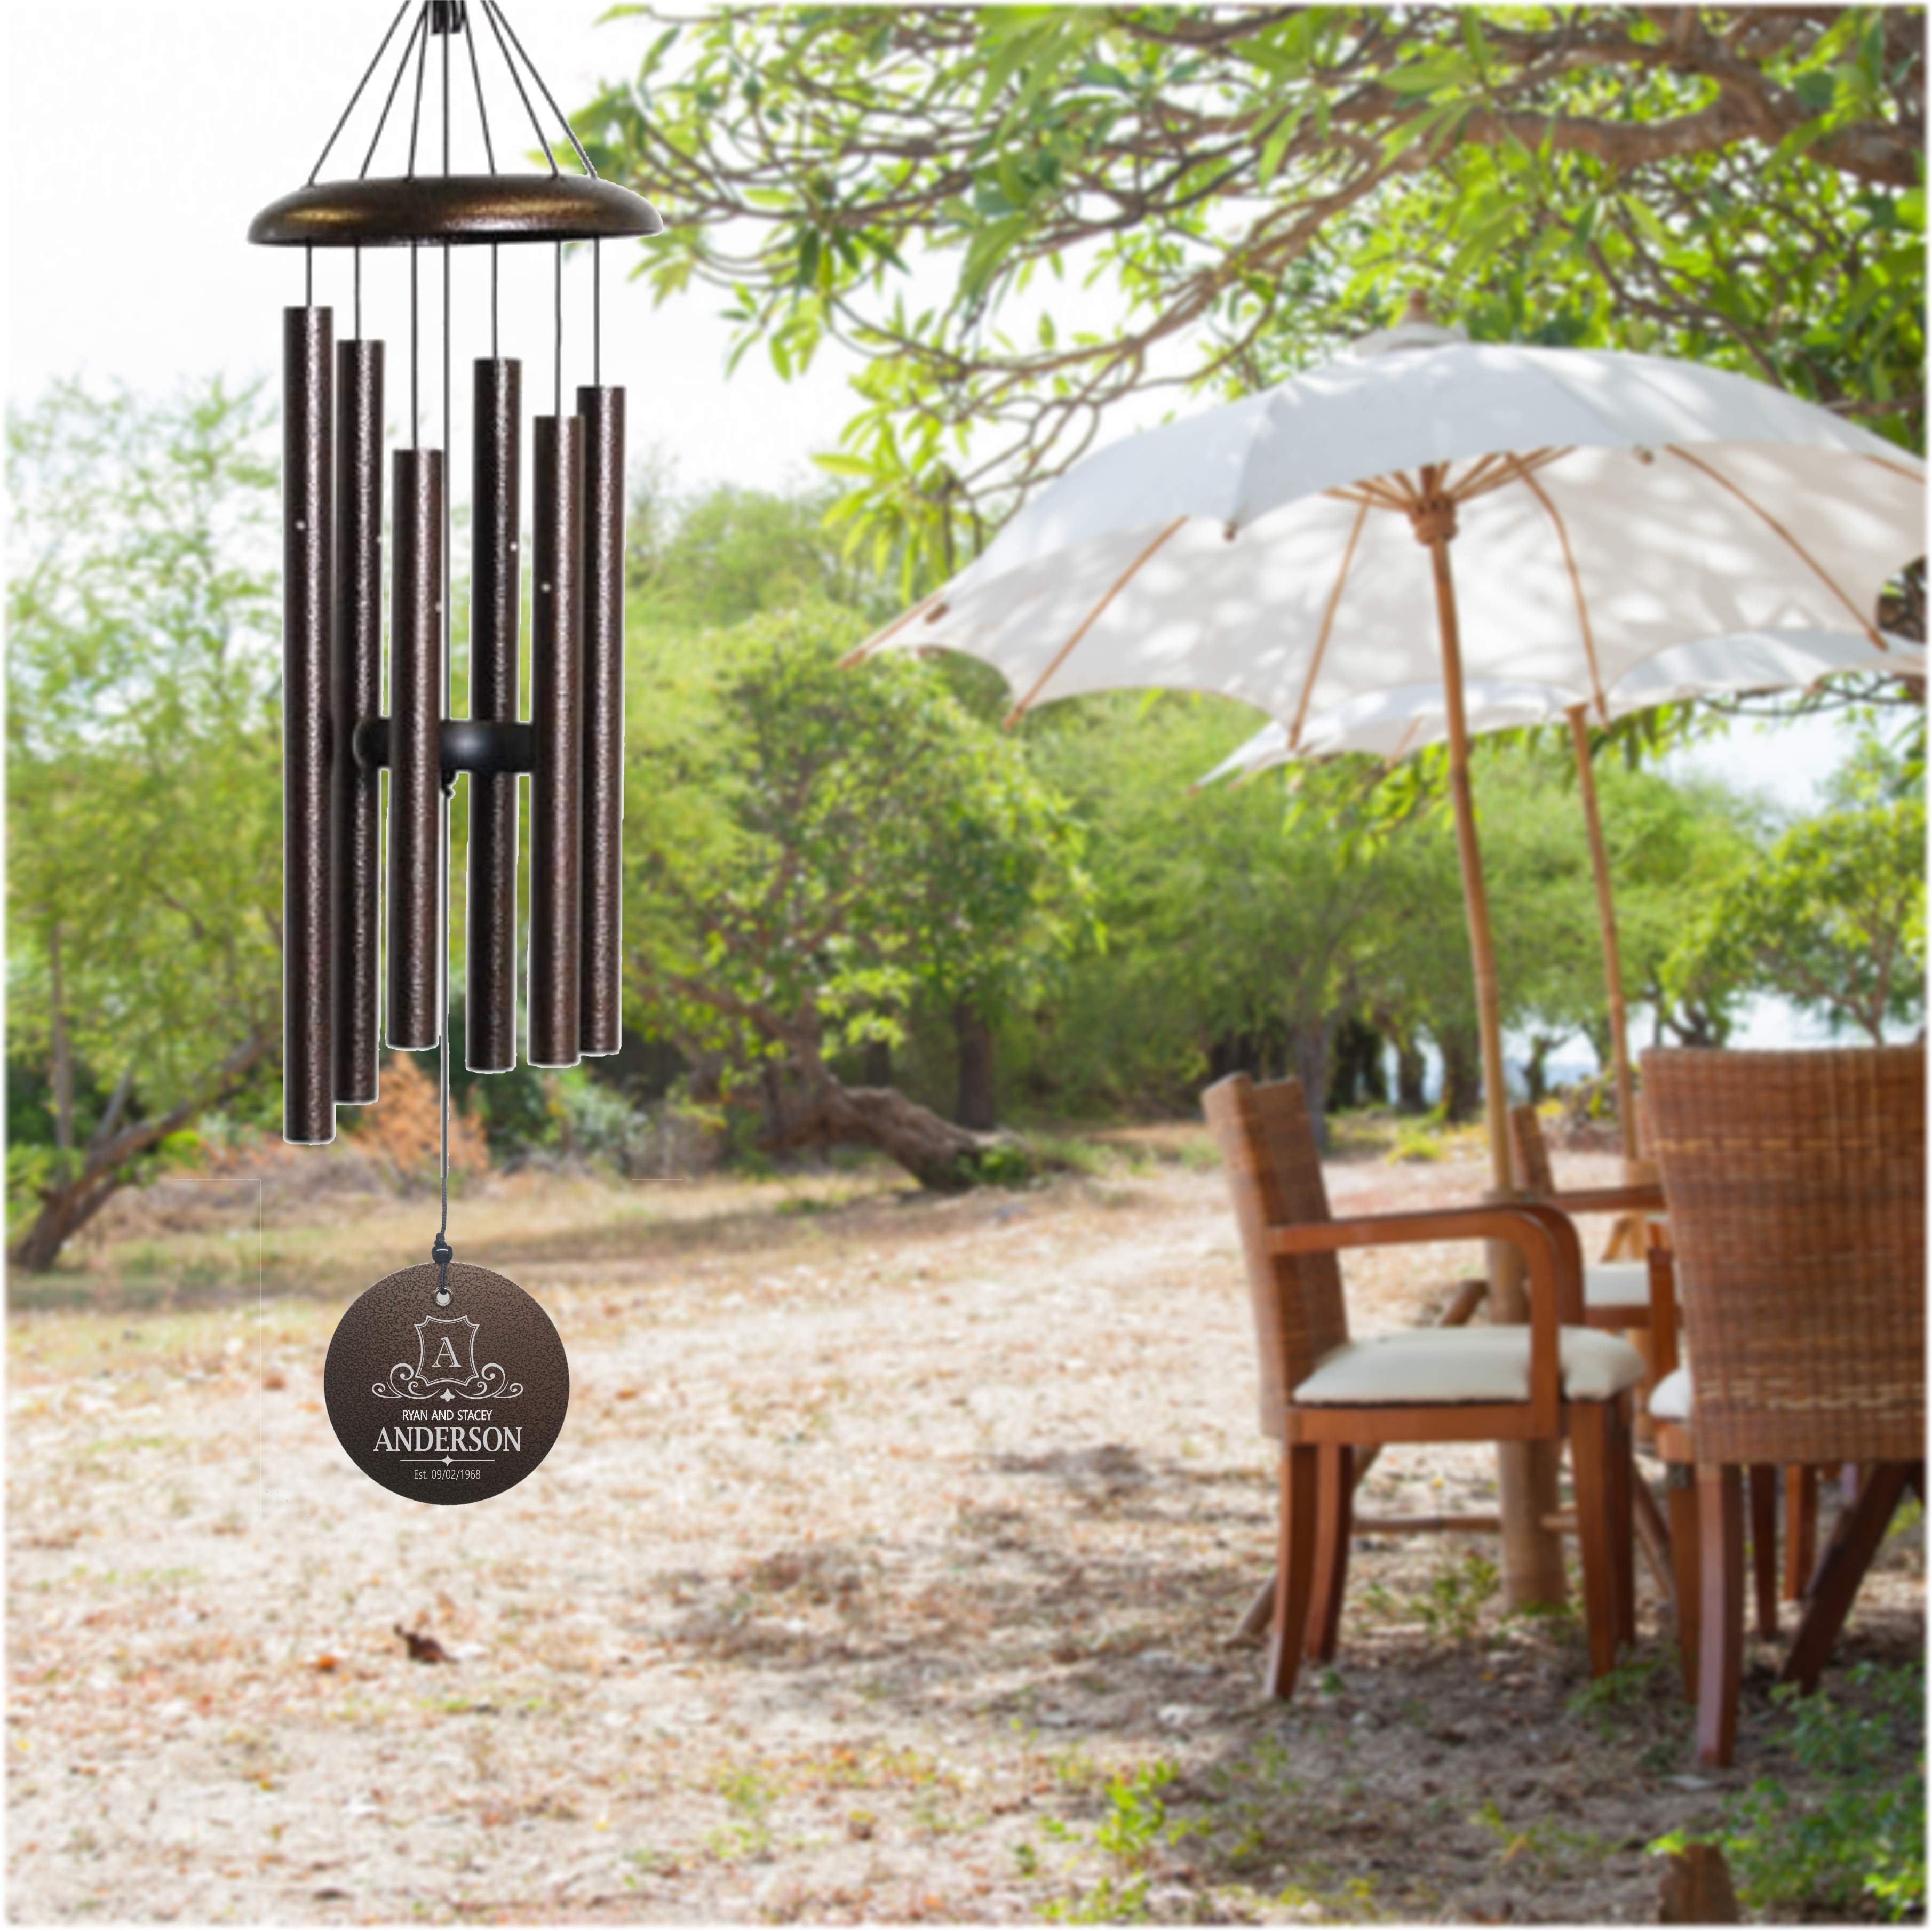 Personalized Anniversary Monogram Wind Chime | Corinthian Bells | Made in USA